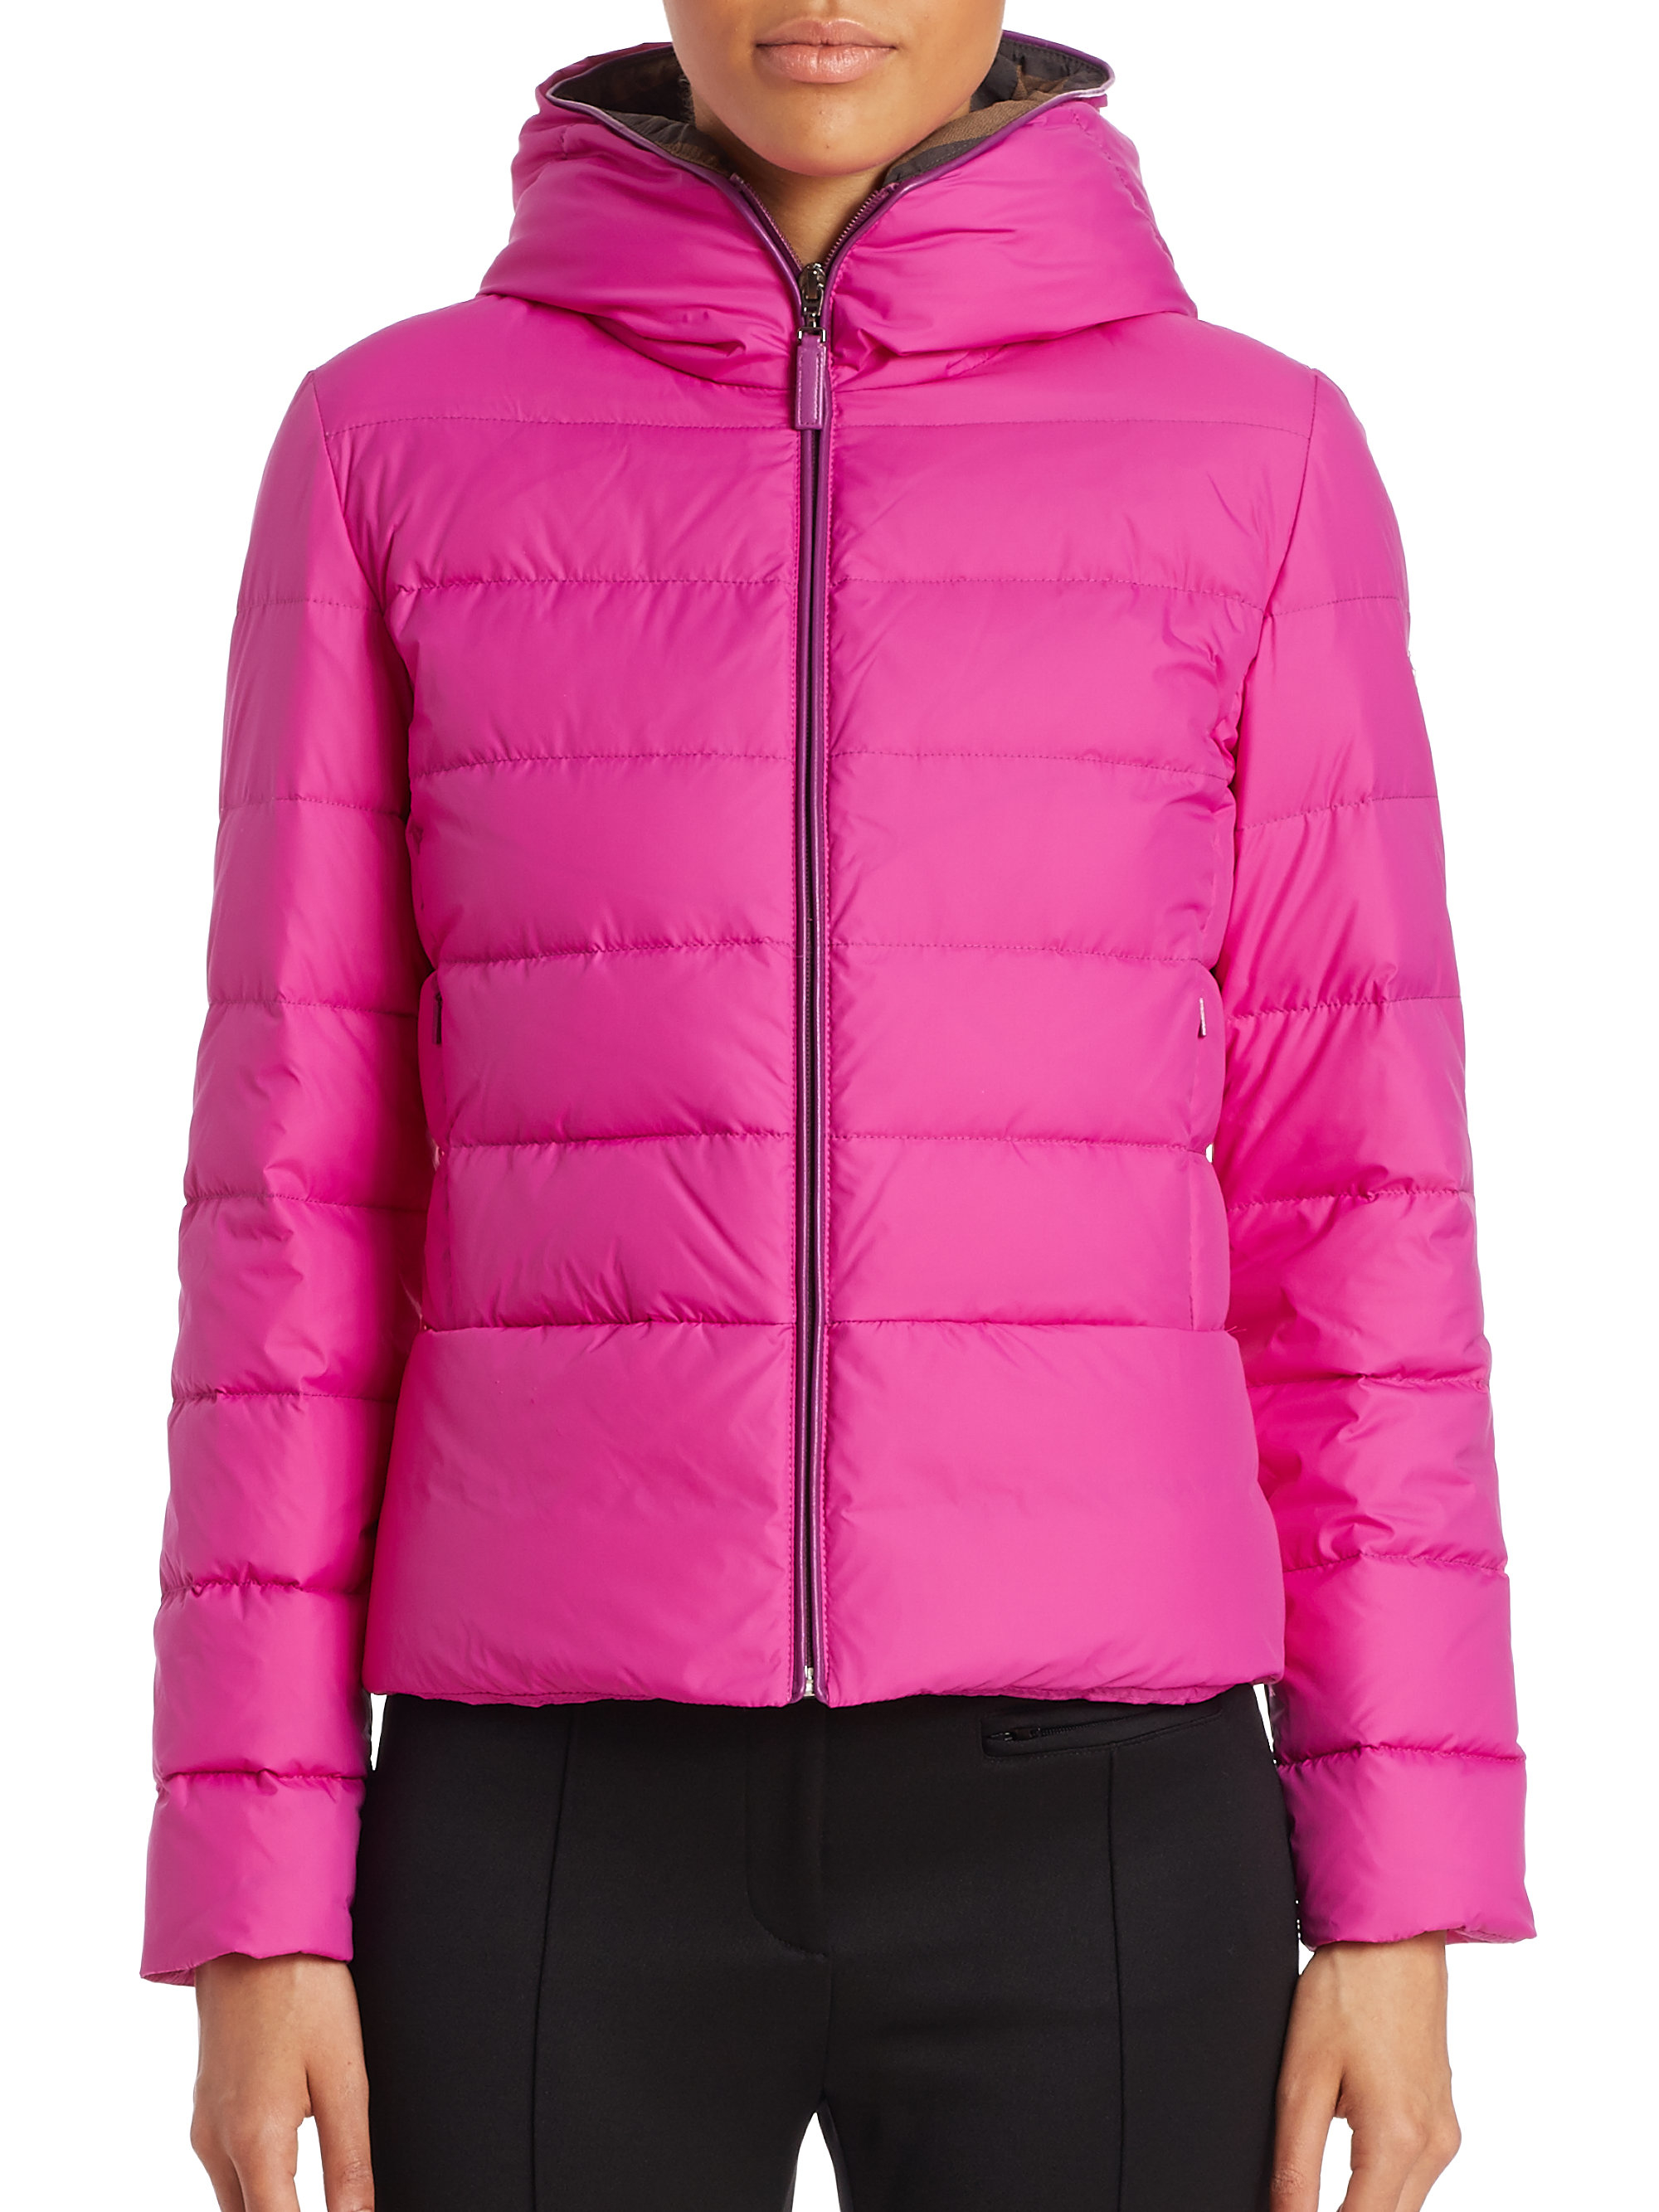 Fendi Synthetic Pequin Puffer Jacket in Pink - Lyst